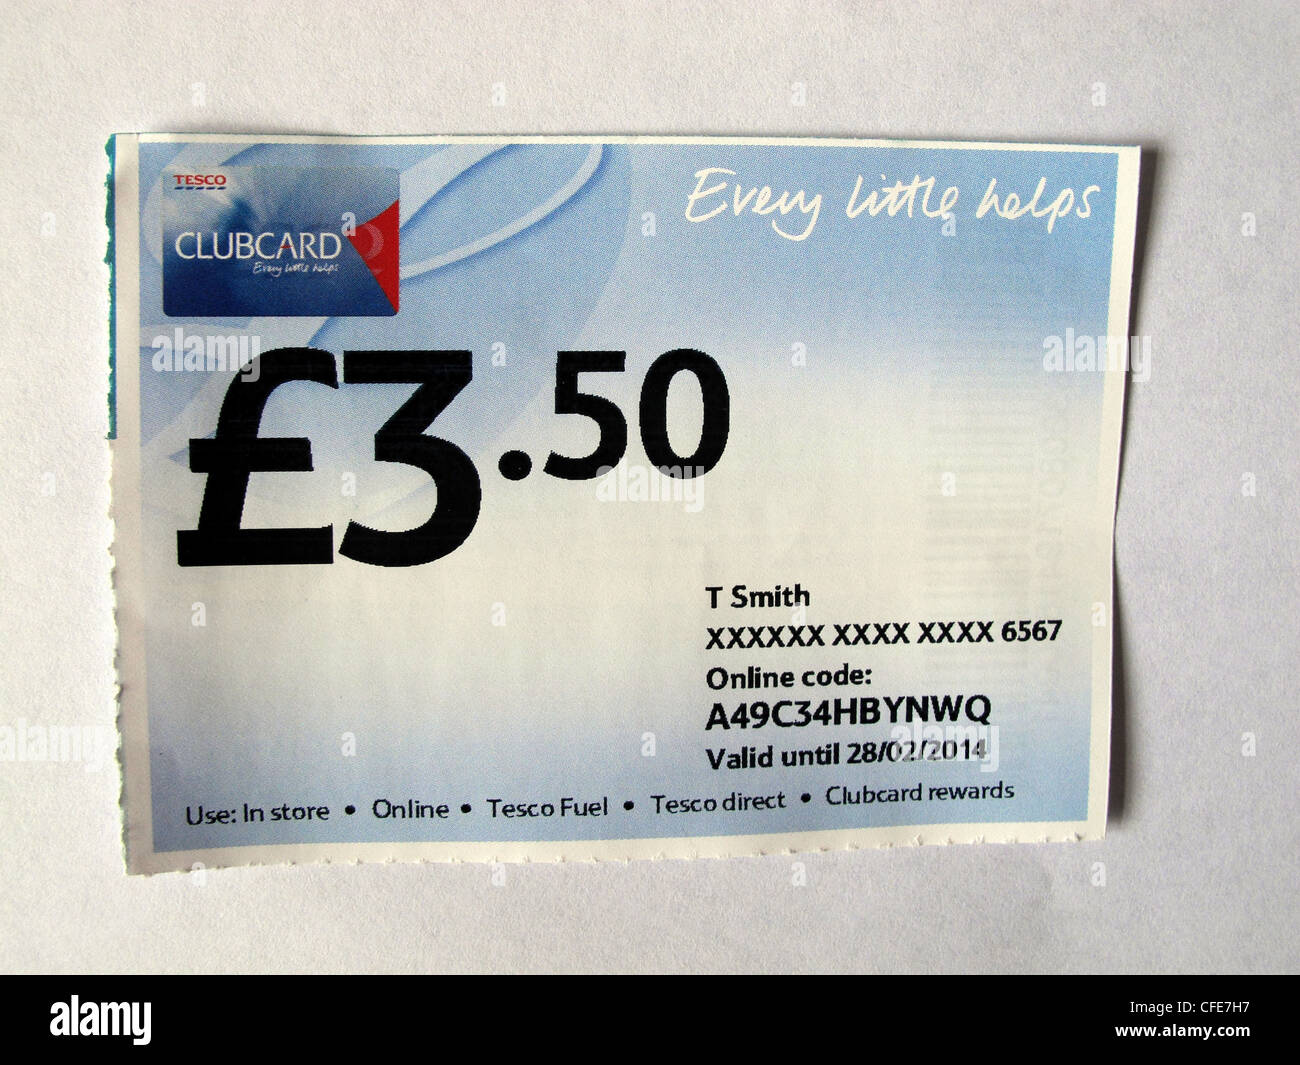 3.50 pound Tesco Clubcard "Every Little Helps" voucher Stock Photo